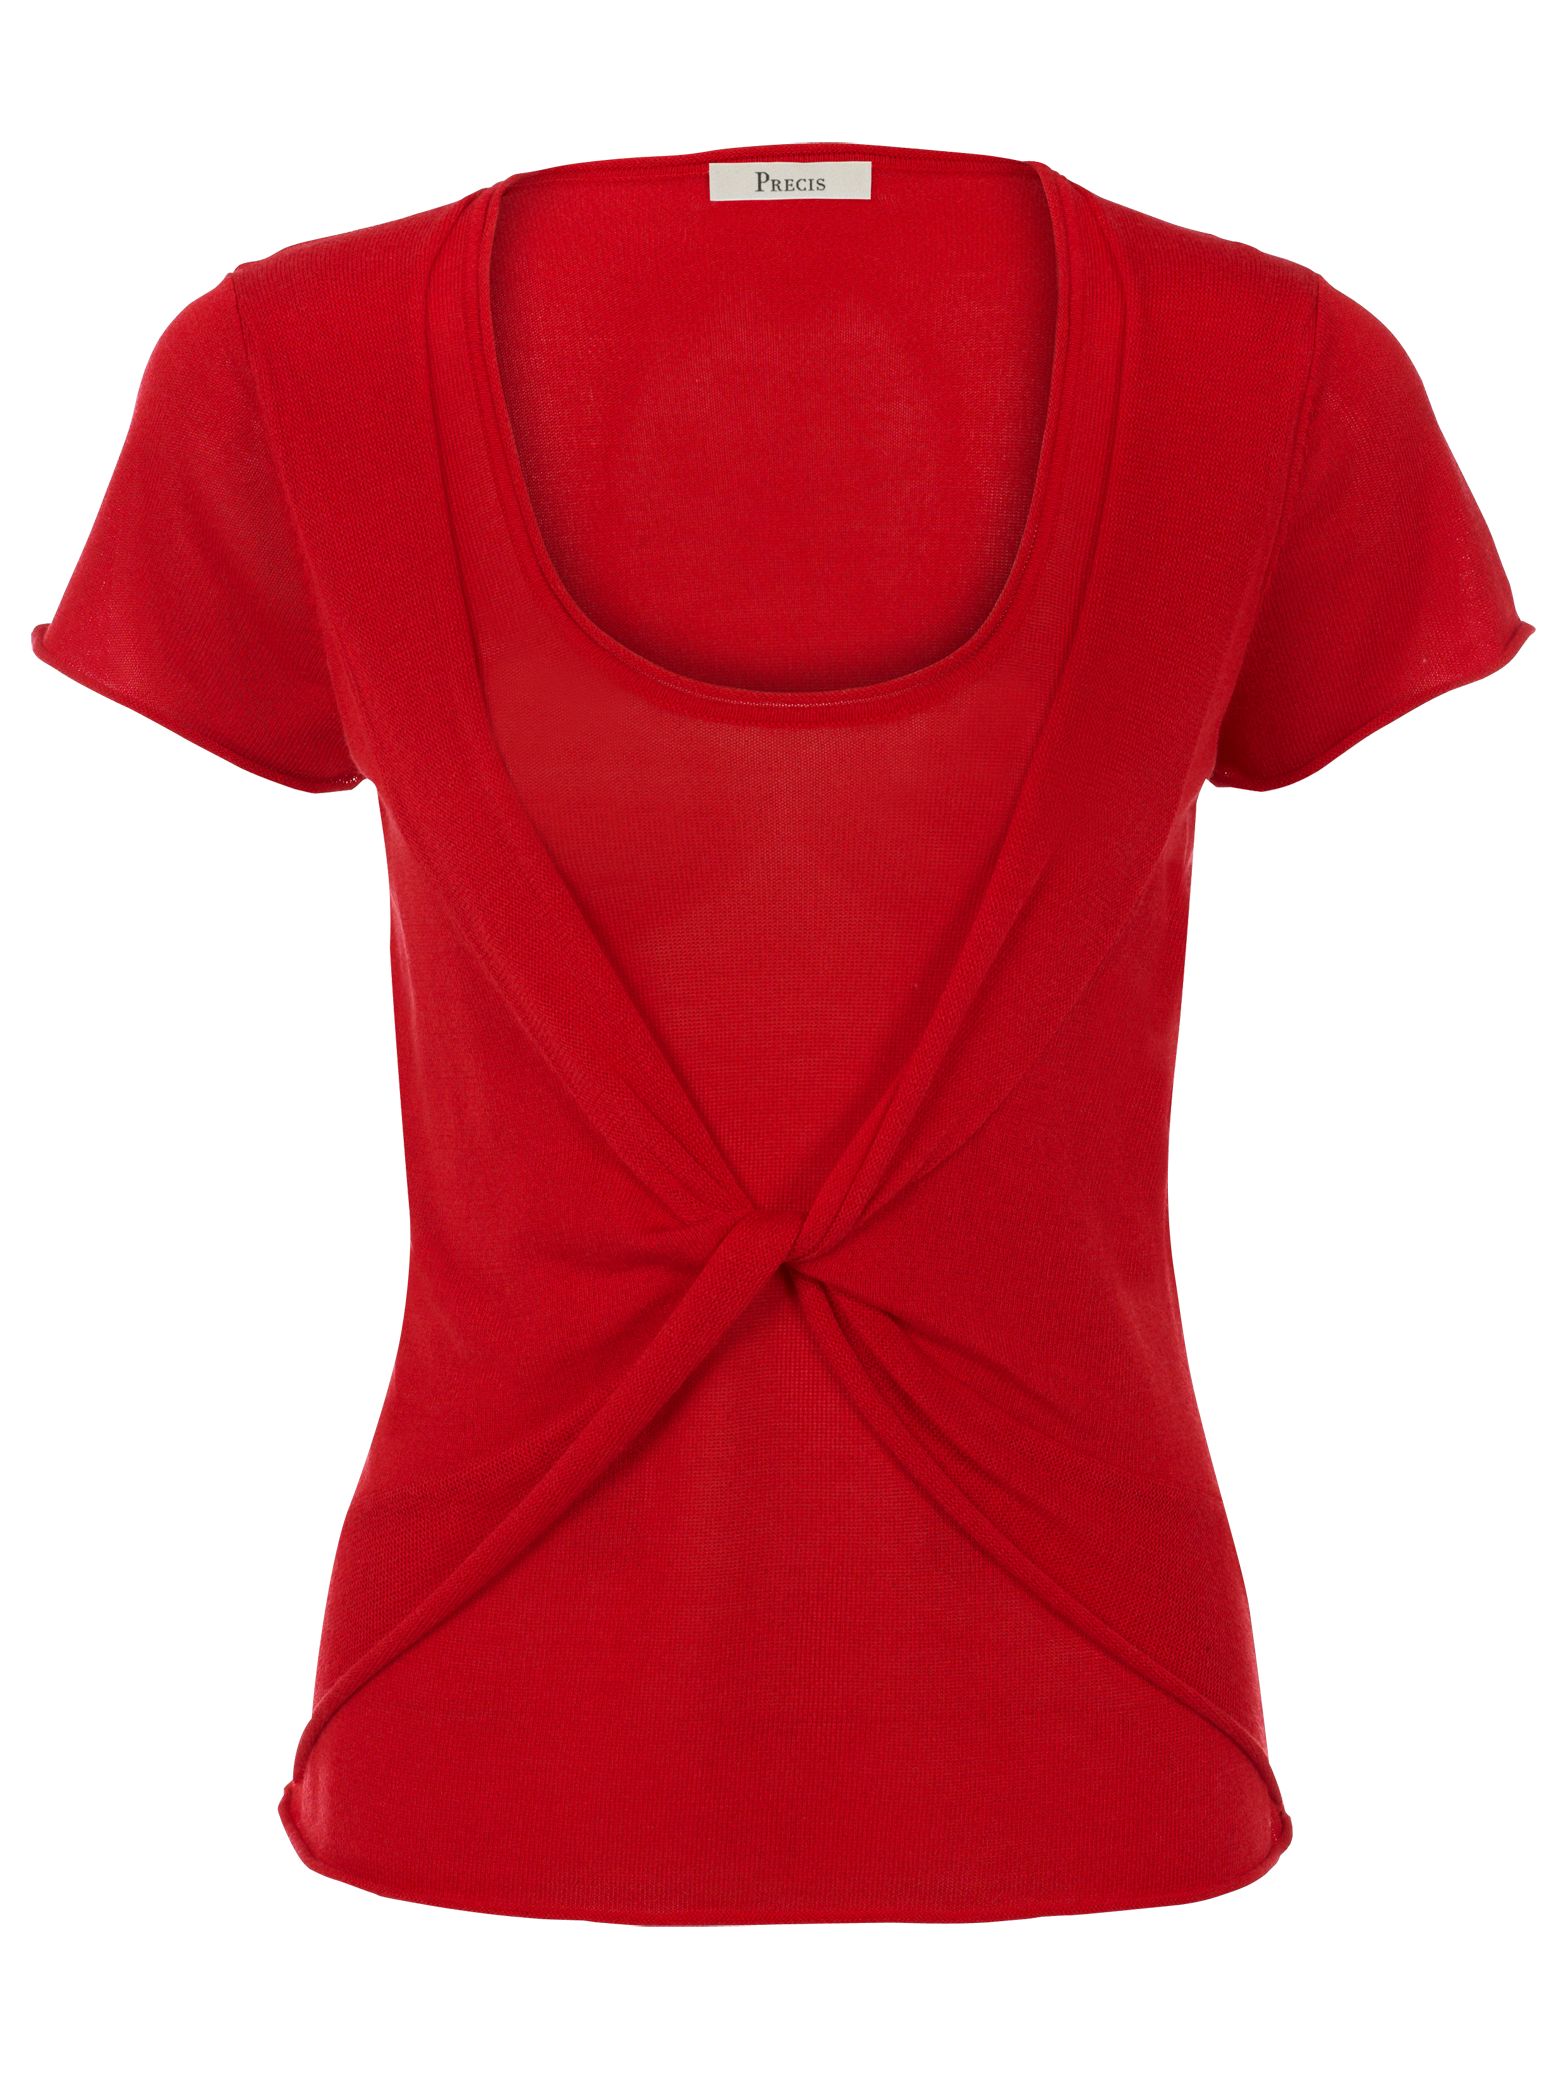 Precis Petite Twisted Front Detail T-Shirt,